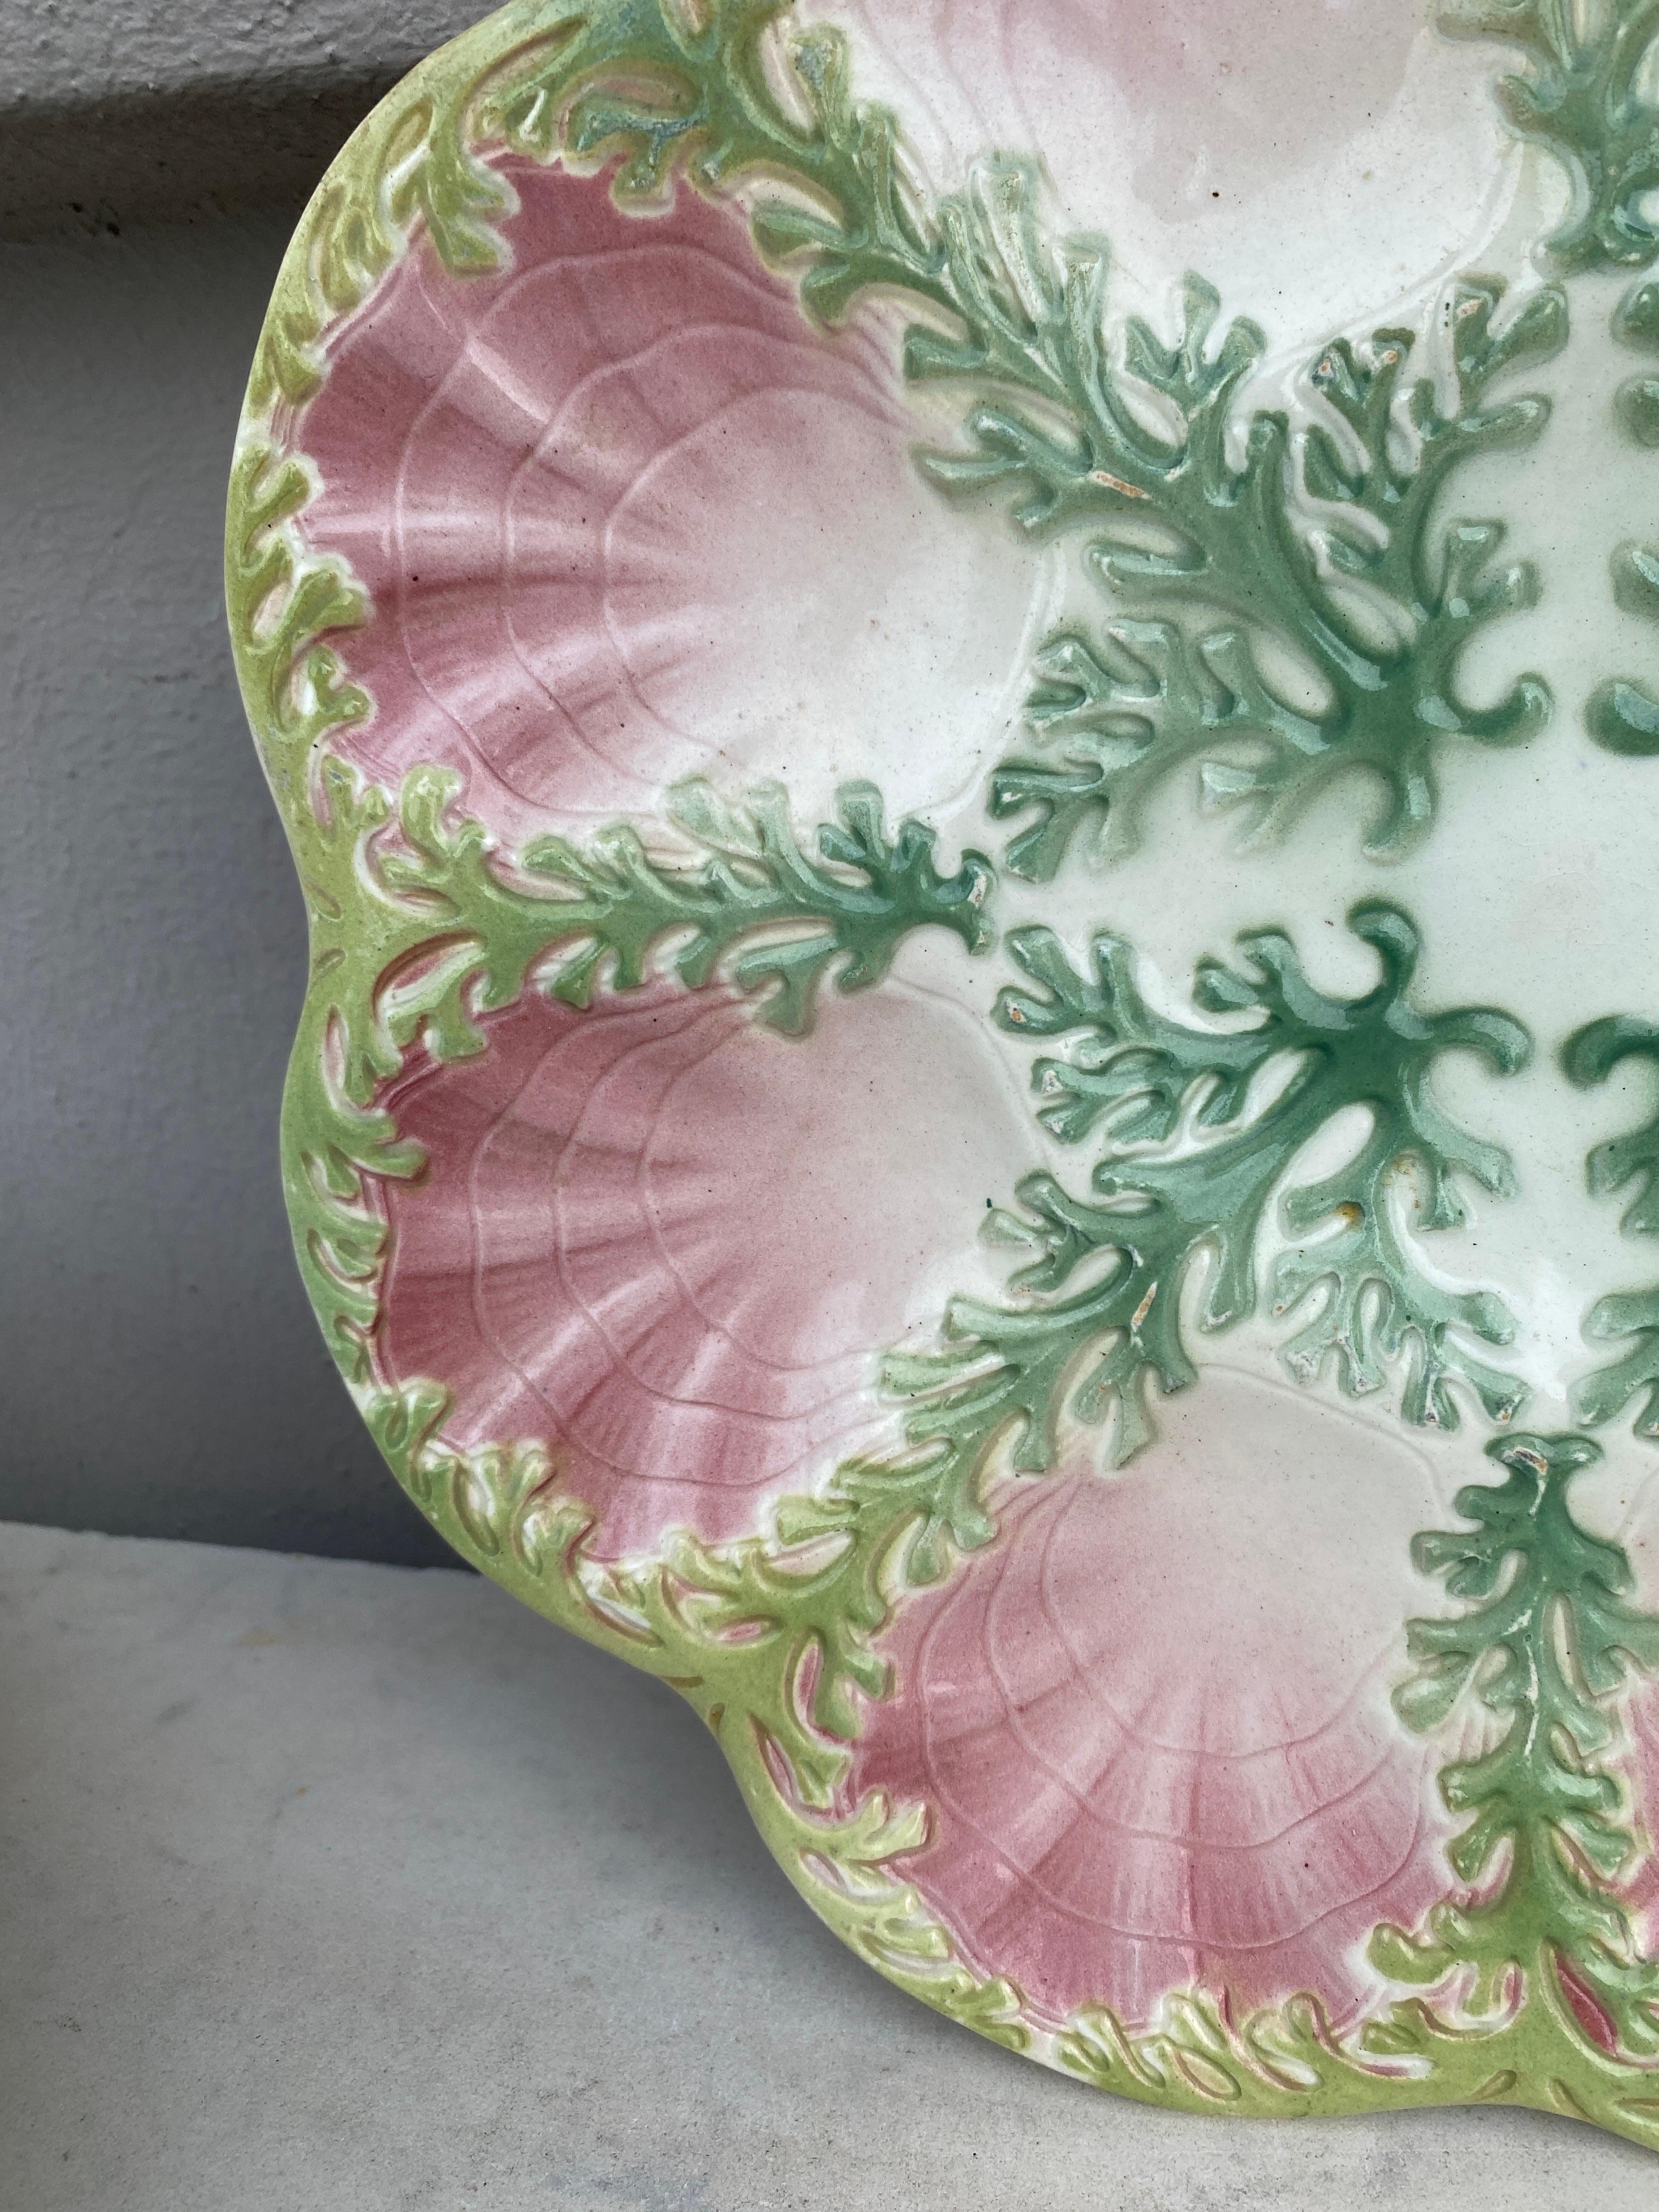 Large rare Majolica oyster plate Keller and Guerin Saint Clement, circa 1890.
Decorated with green seaweeds.
This plate exist in green and pink with 2 different sizes.